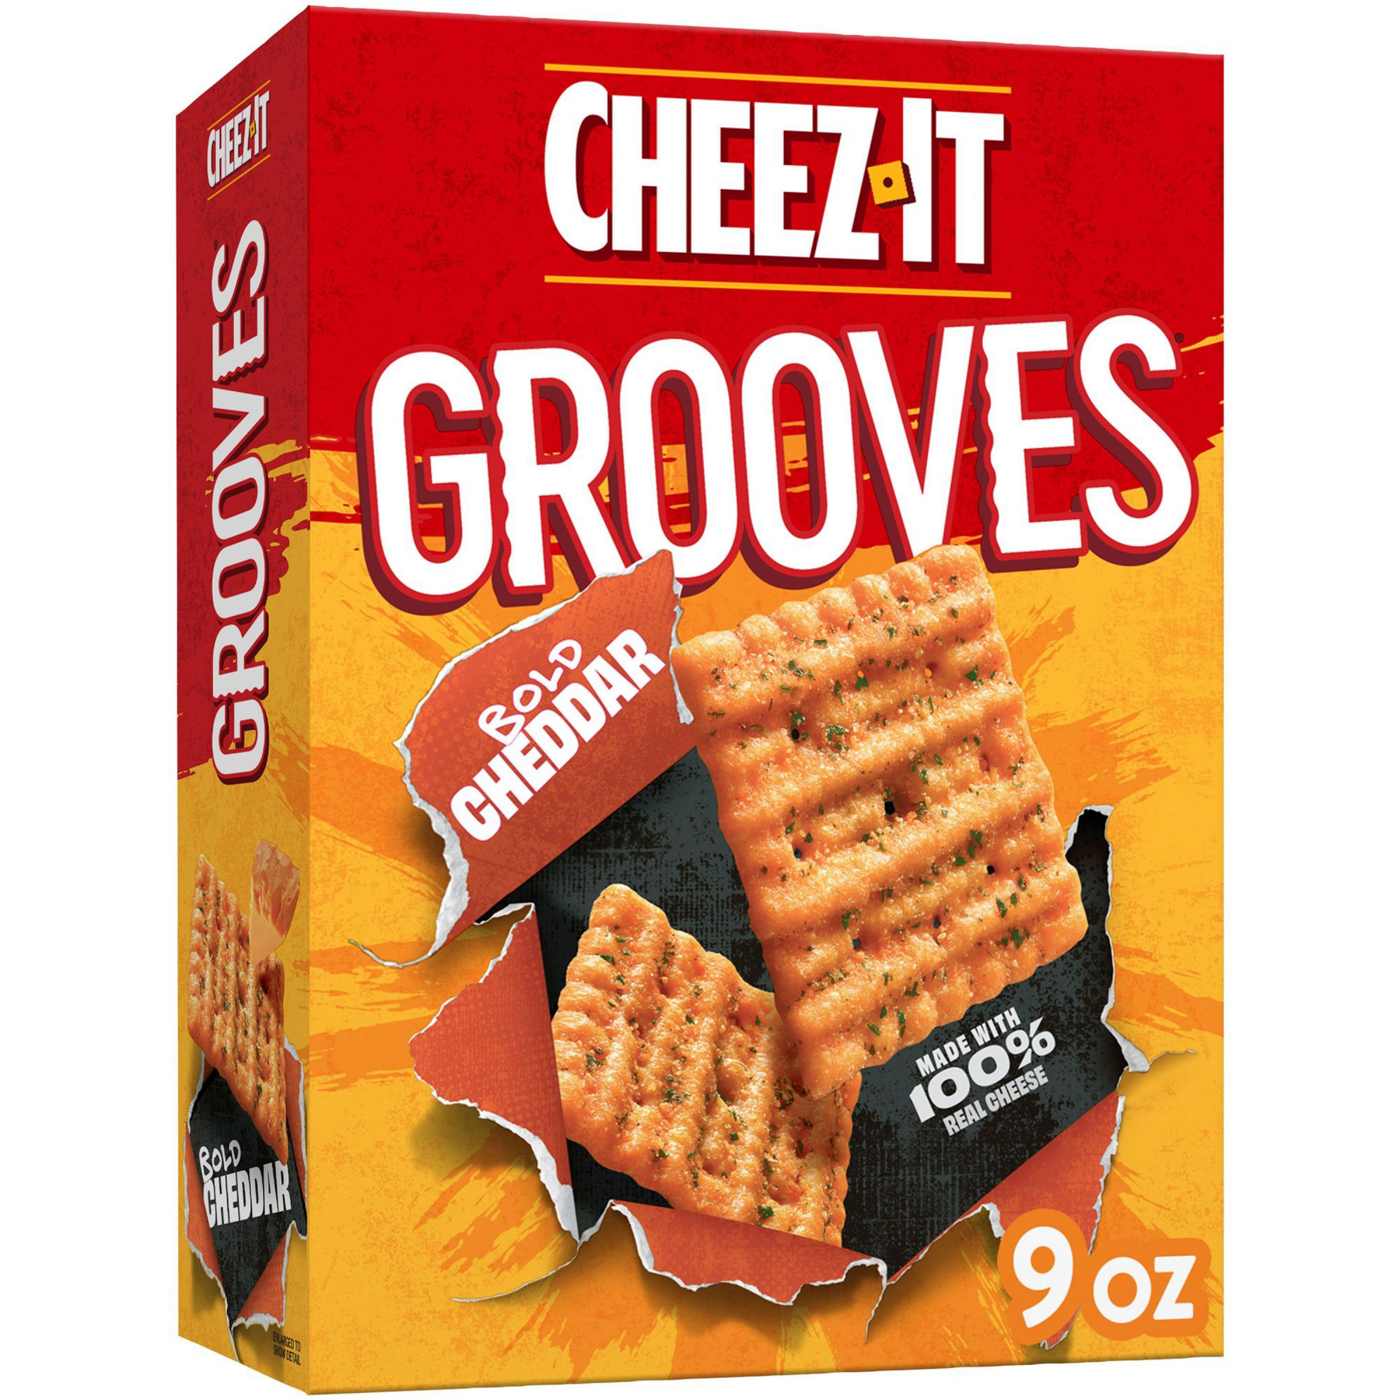 Cheez-It Grooves Bold Cheddar Cheese Crackers; image 2 of 5